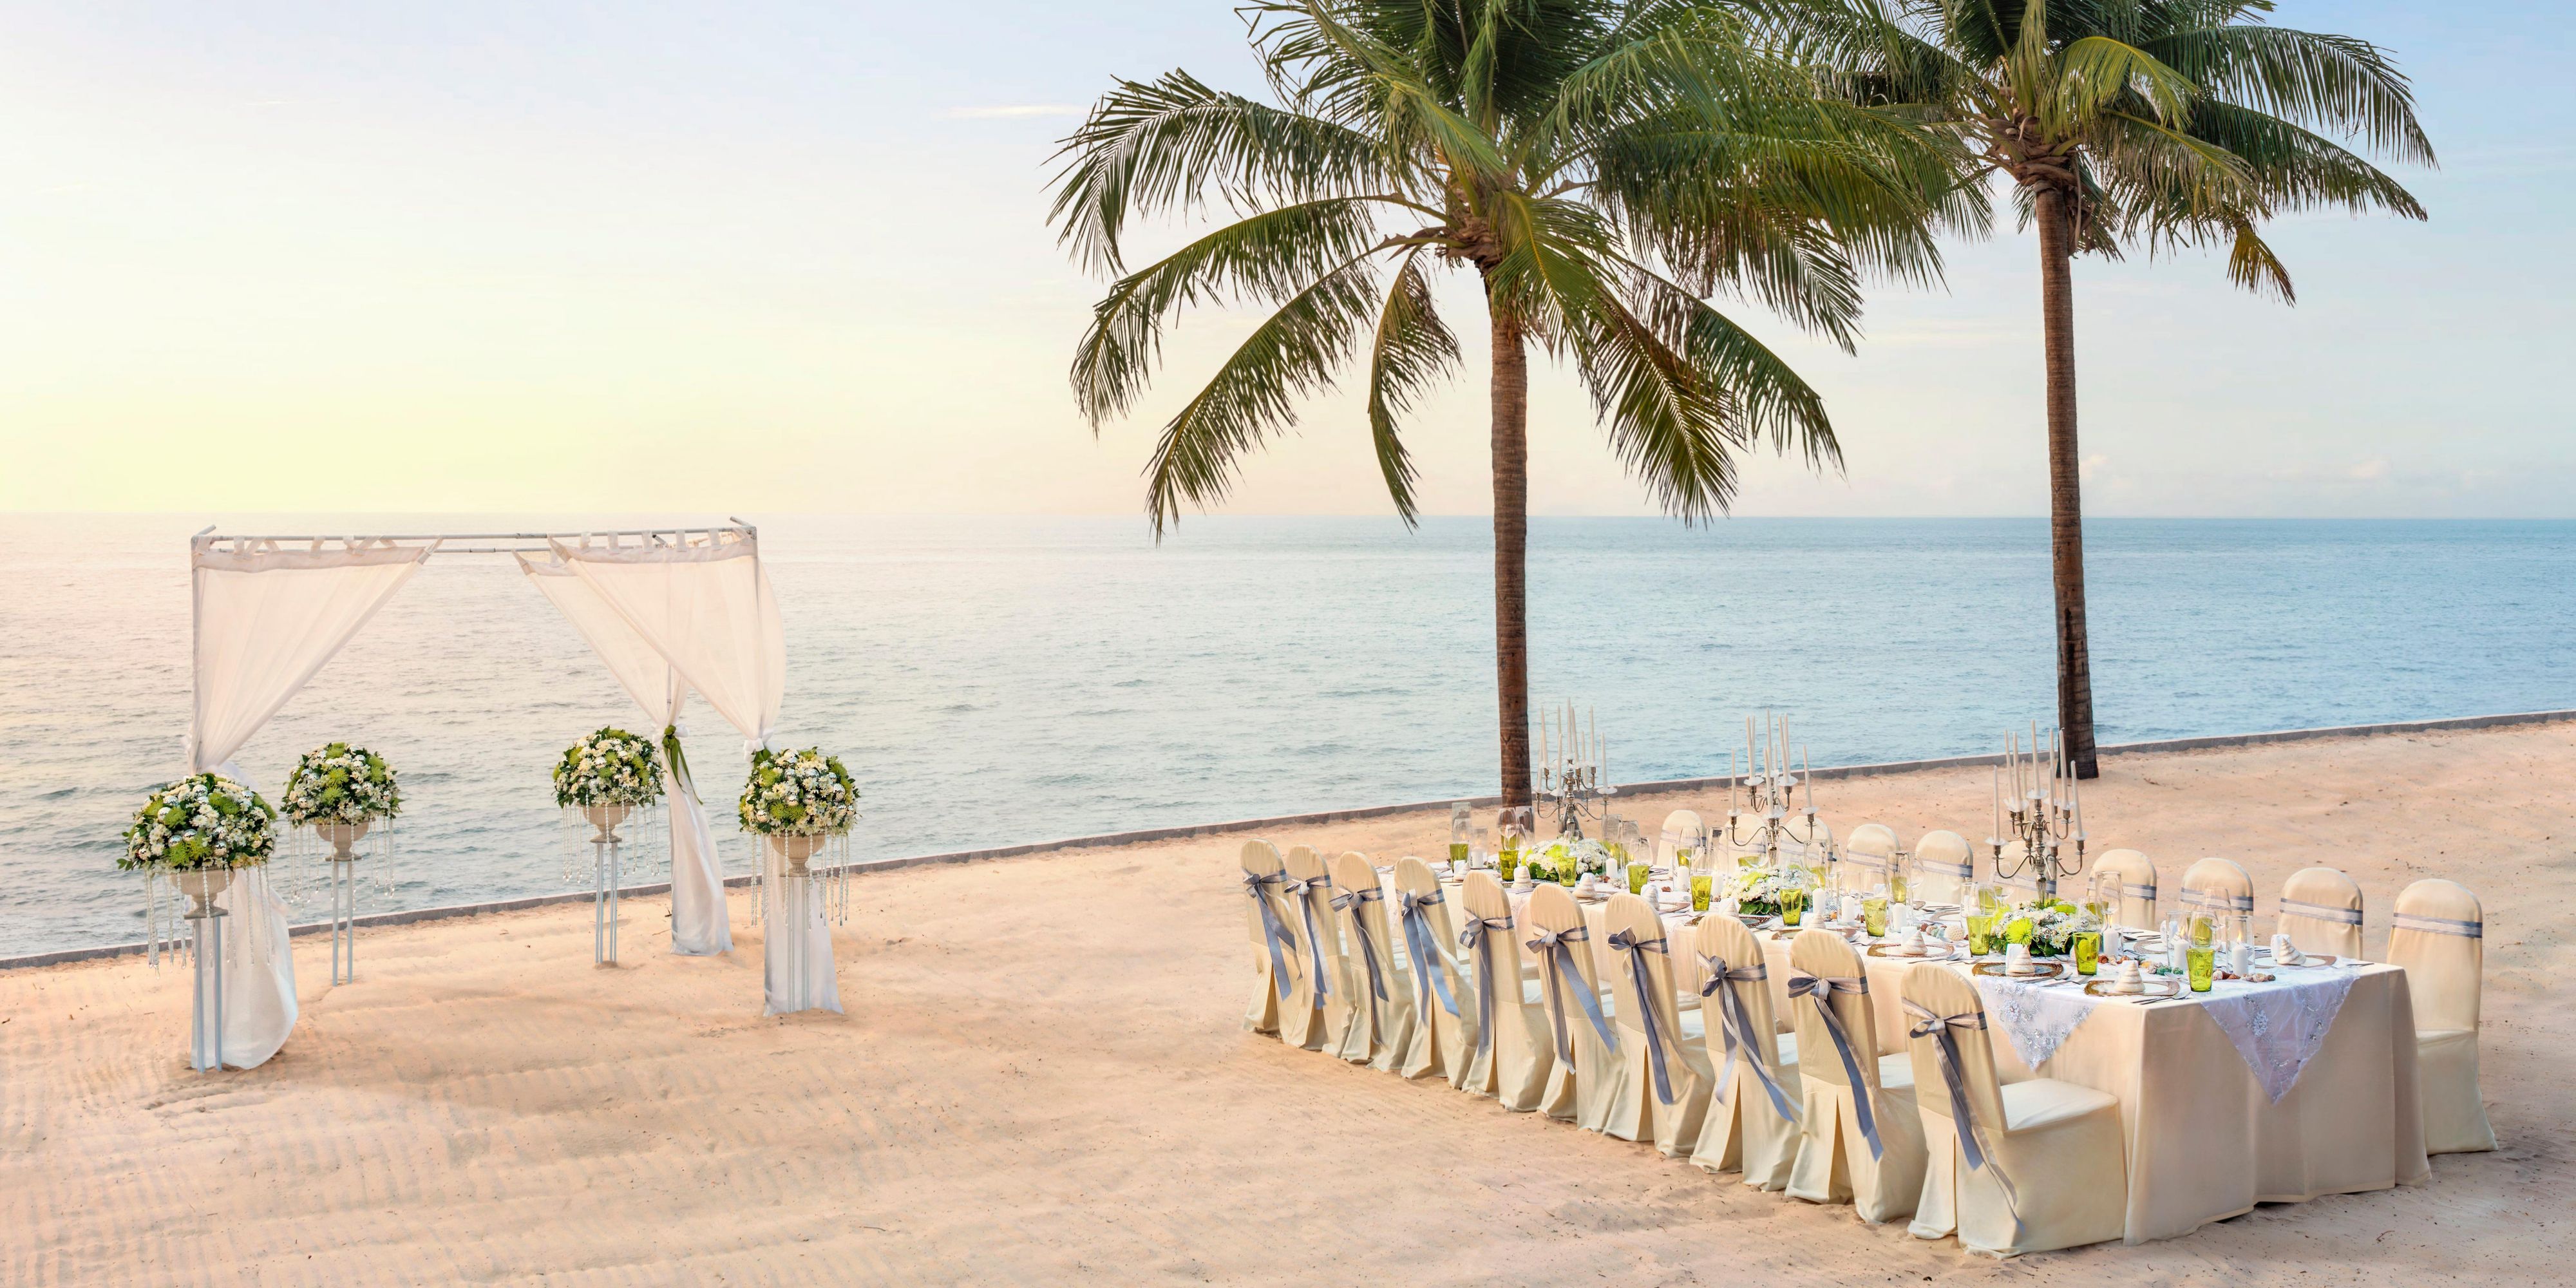 Bring your dream beach wedding to life. Our attentive wedding specialists will curate and personalise every detail for your big day. Choose your mesmerising setting, from picturesque ocean views to a romantic indoor ambience and let our team handle the rest of the details for you.